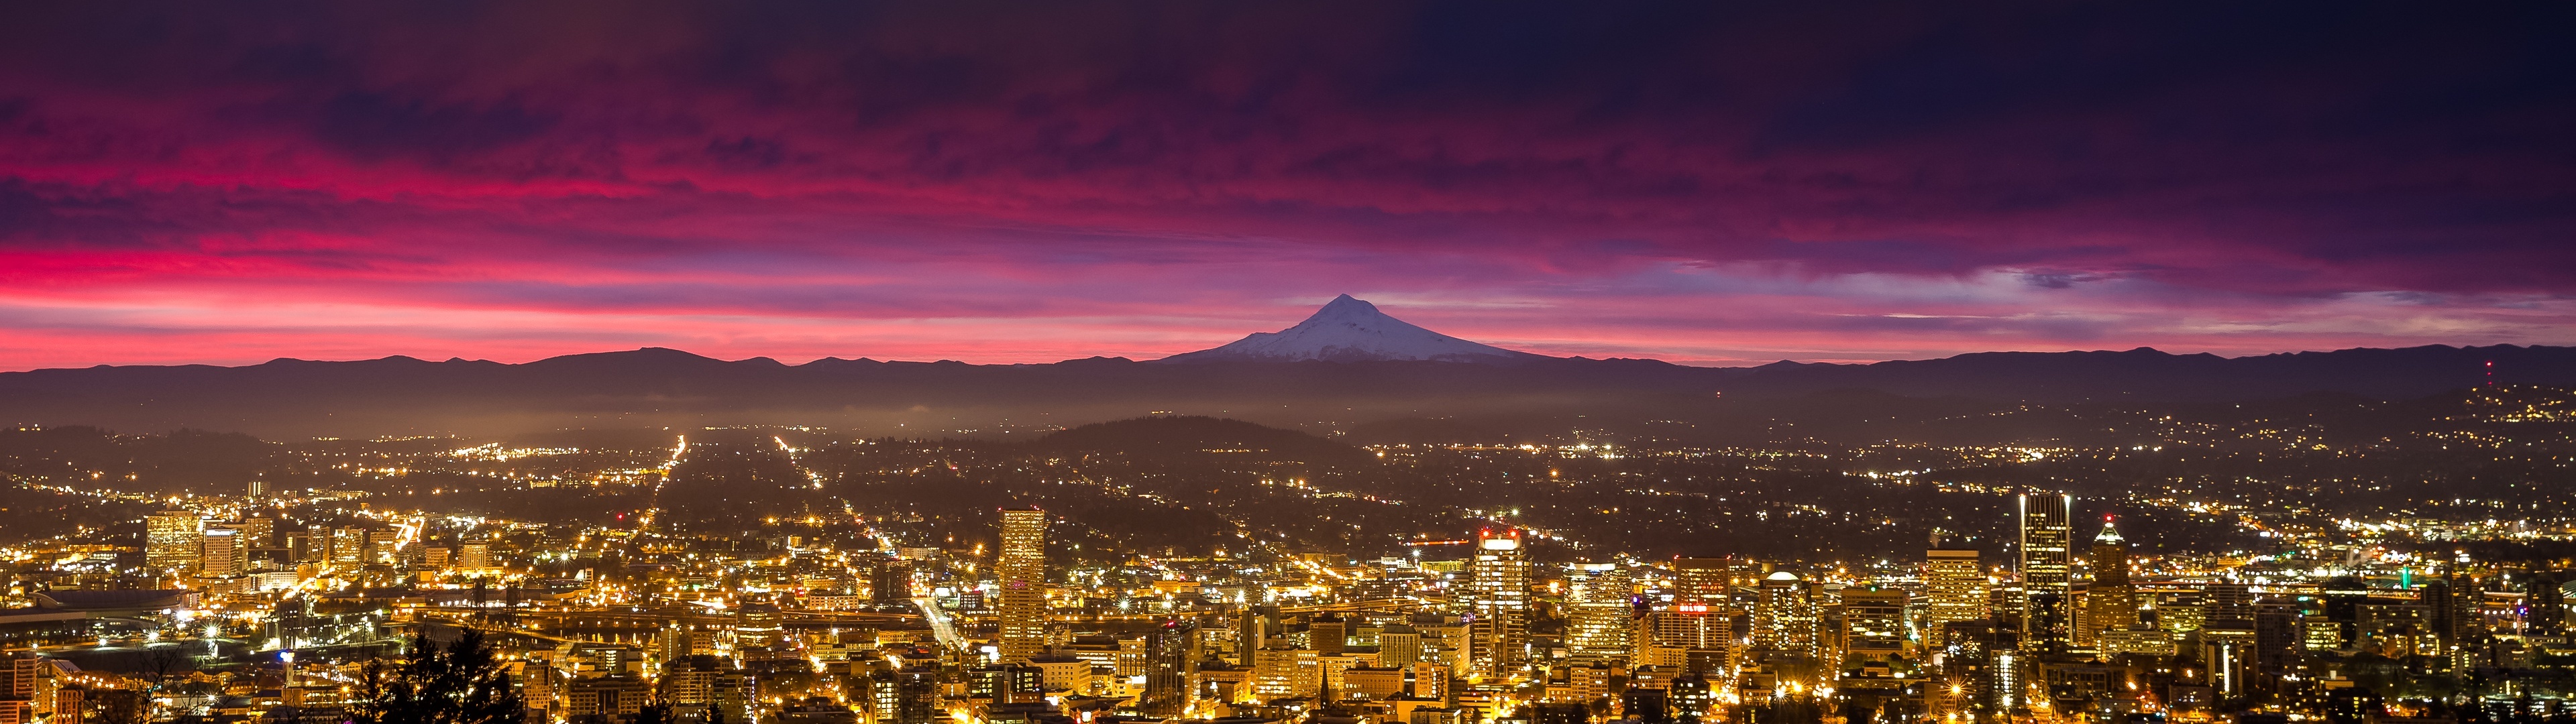 Portland Skyline, Dual monitor wallpapers, High-definition collection, Wallpaper page, 3840x1080 Dual Screen Desktop